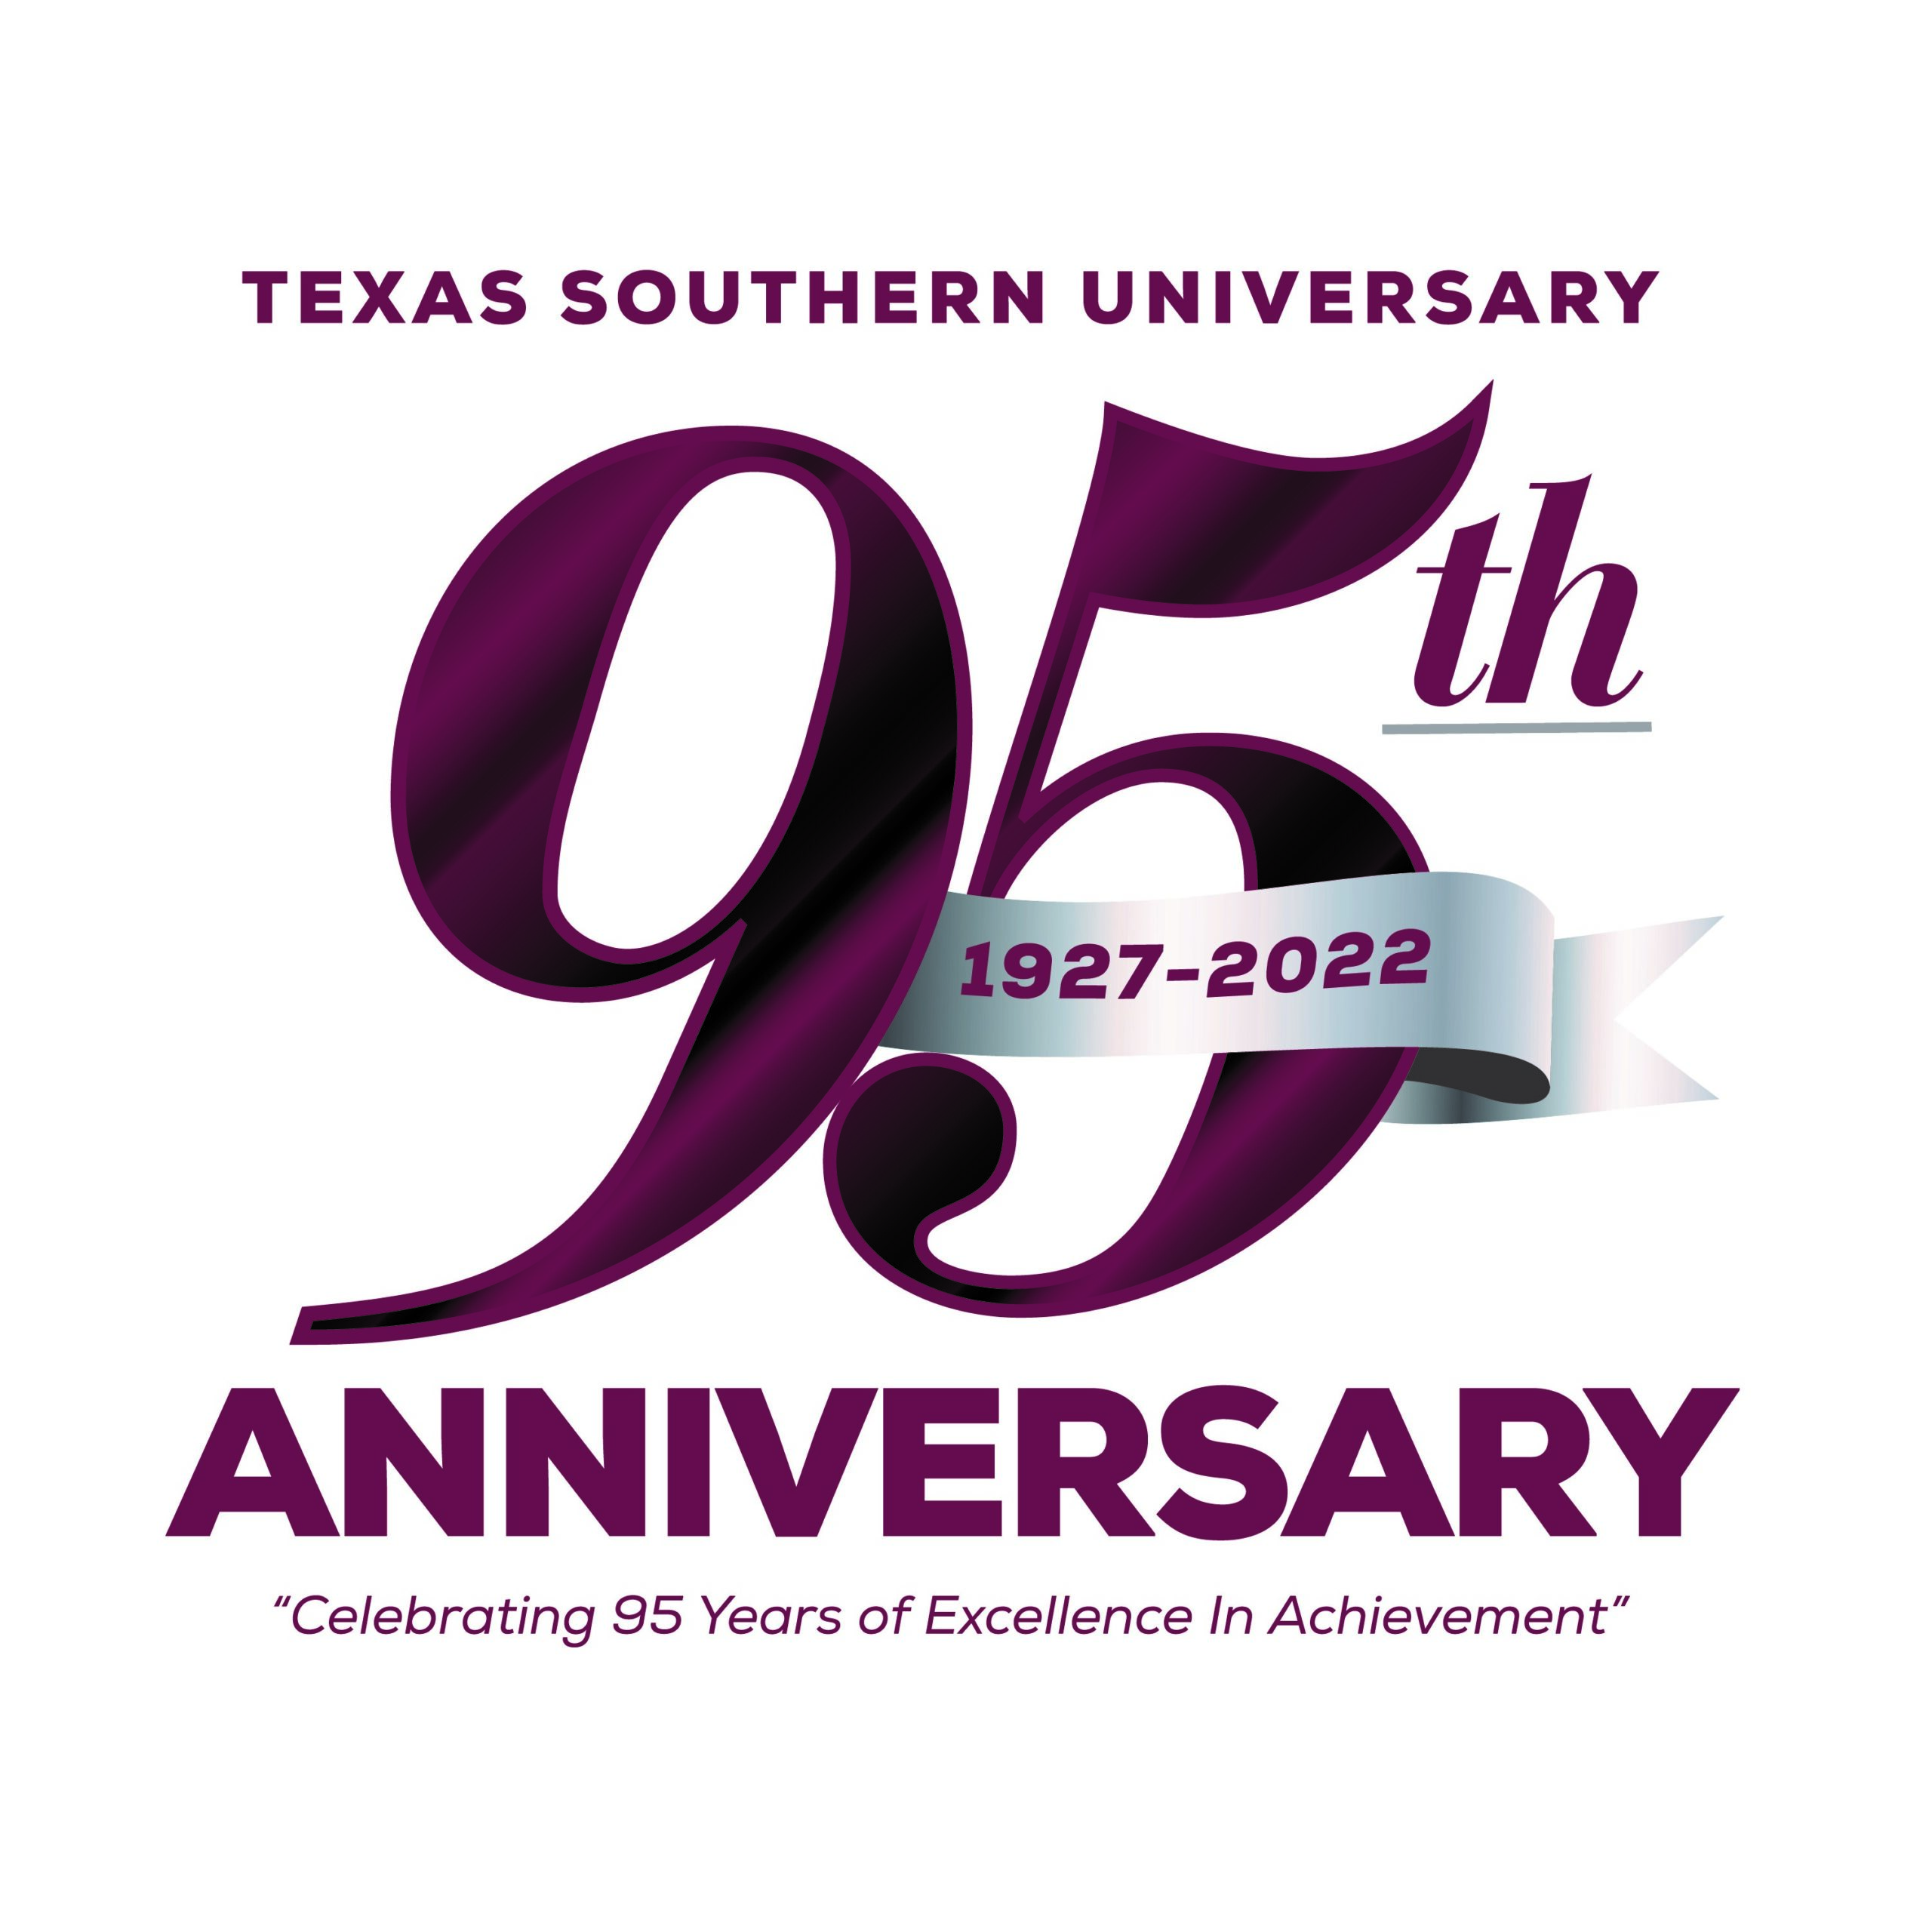 Texas Southern University Celebrates 95 Years of Excellence in